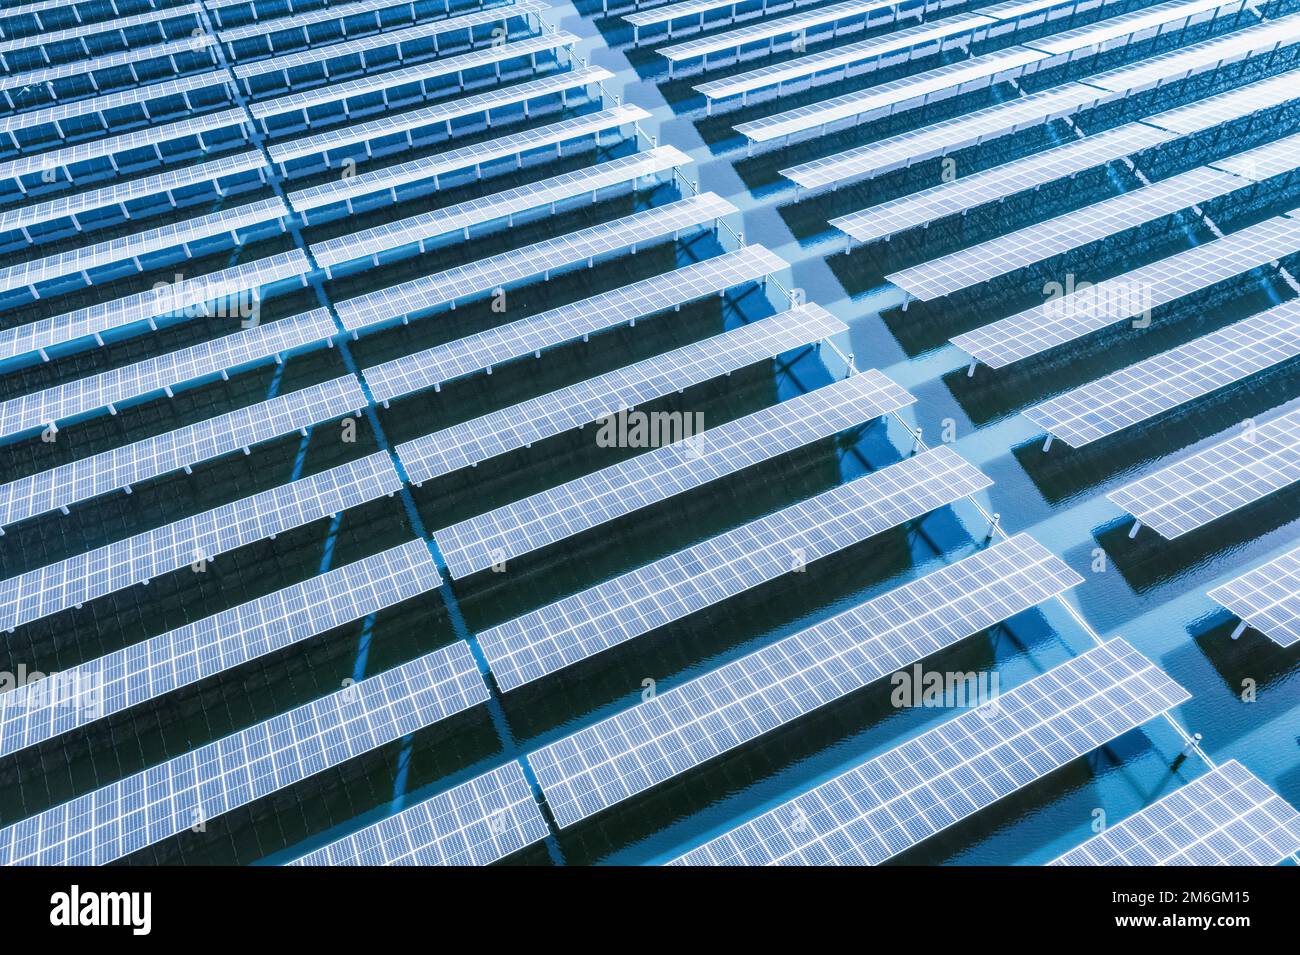 Solar panels on blue water surface Stock Photo